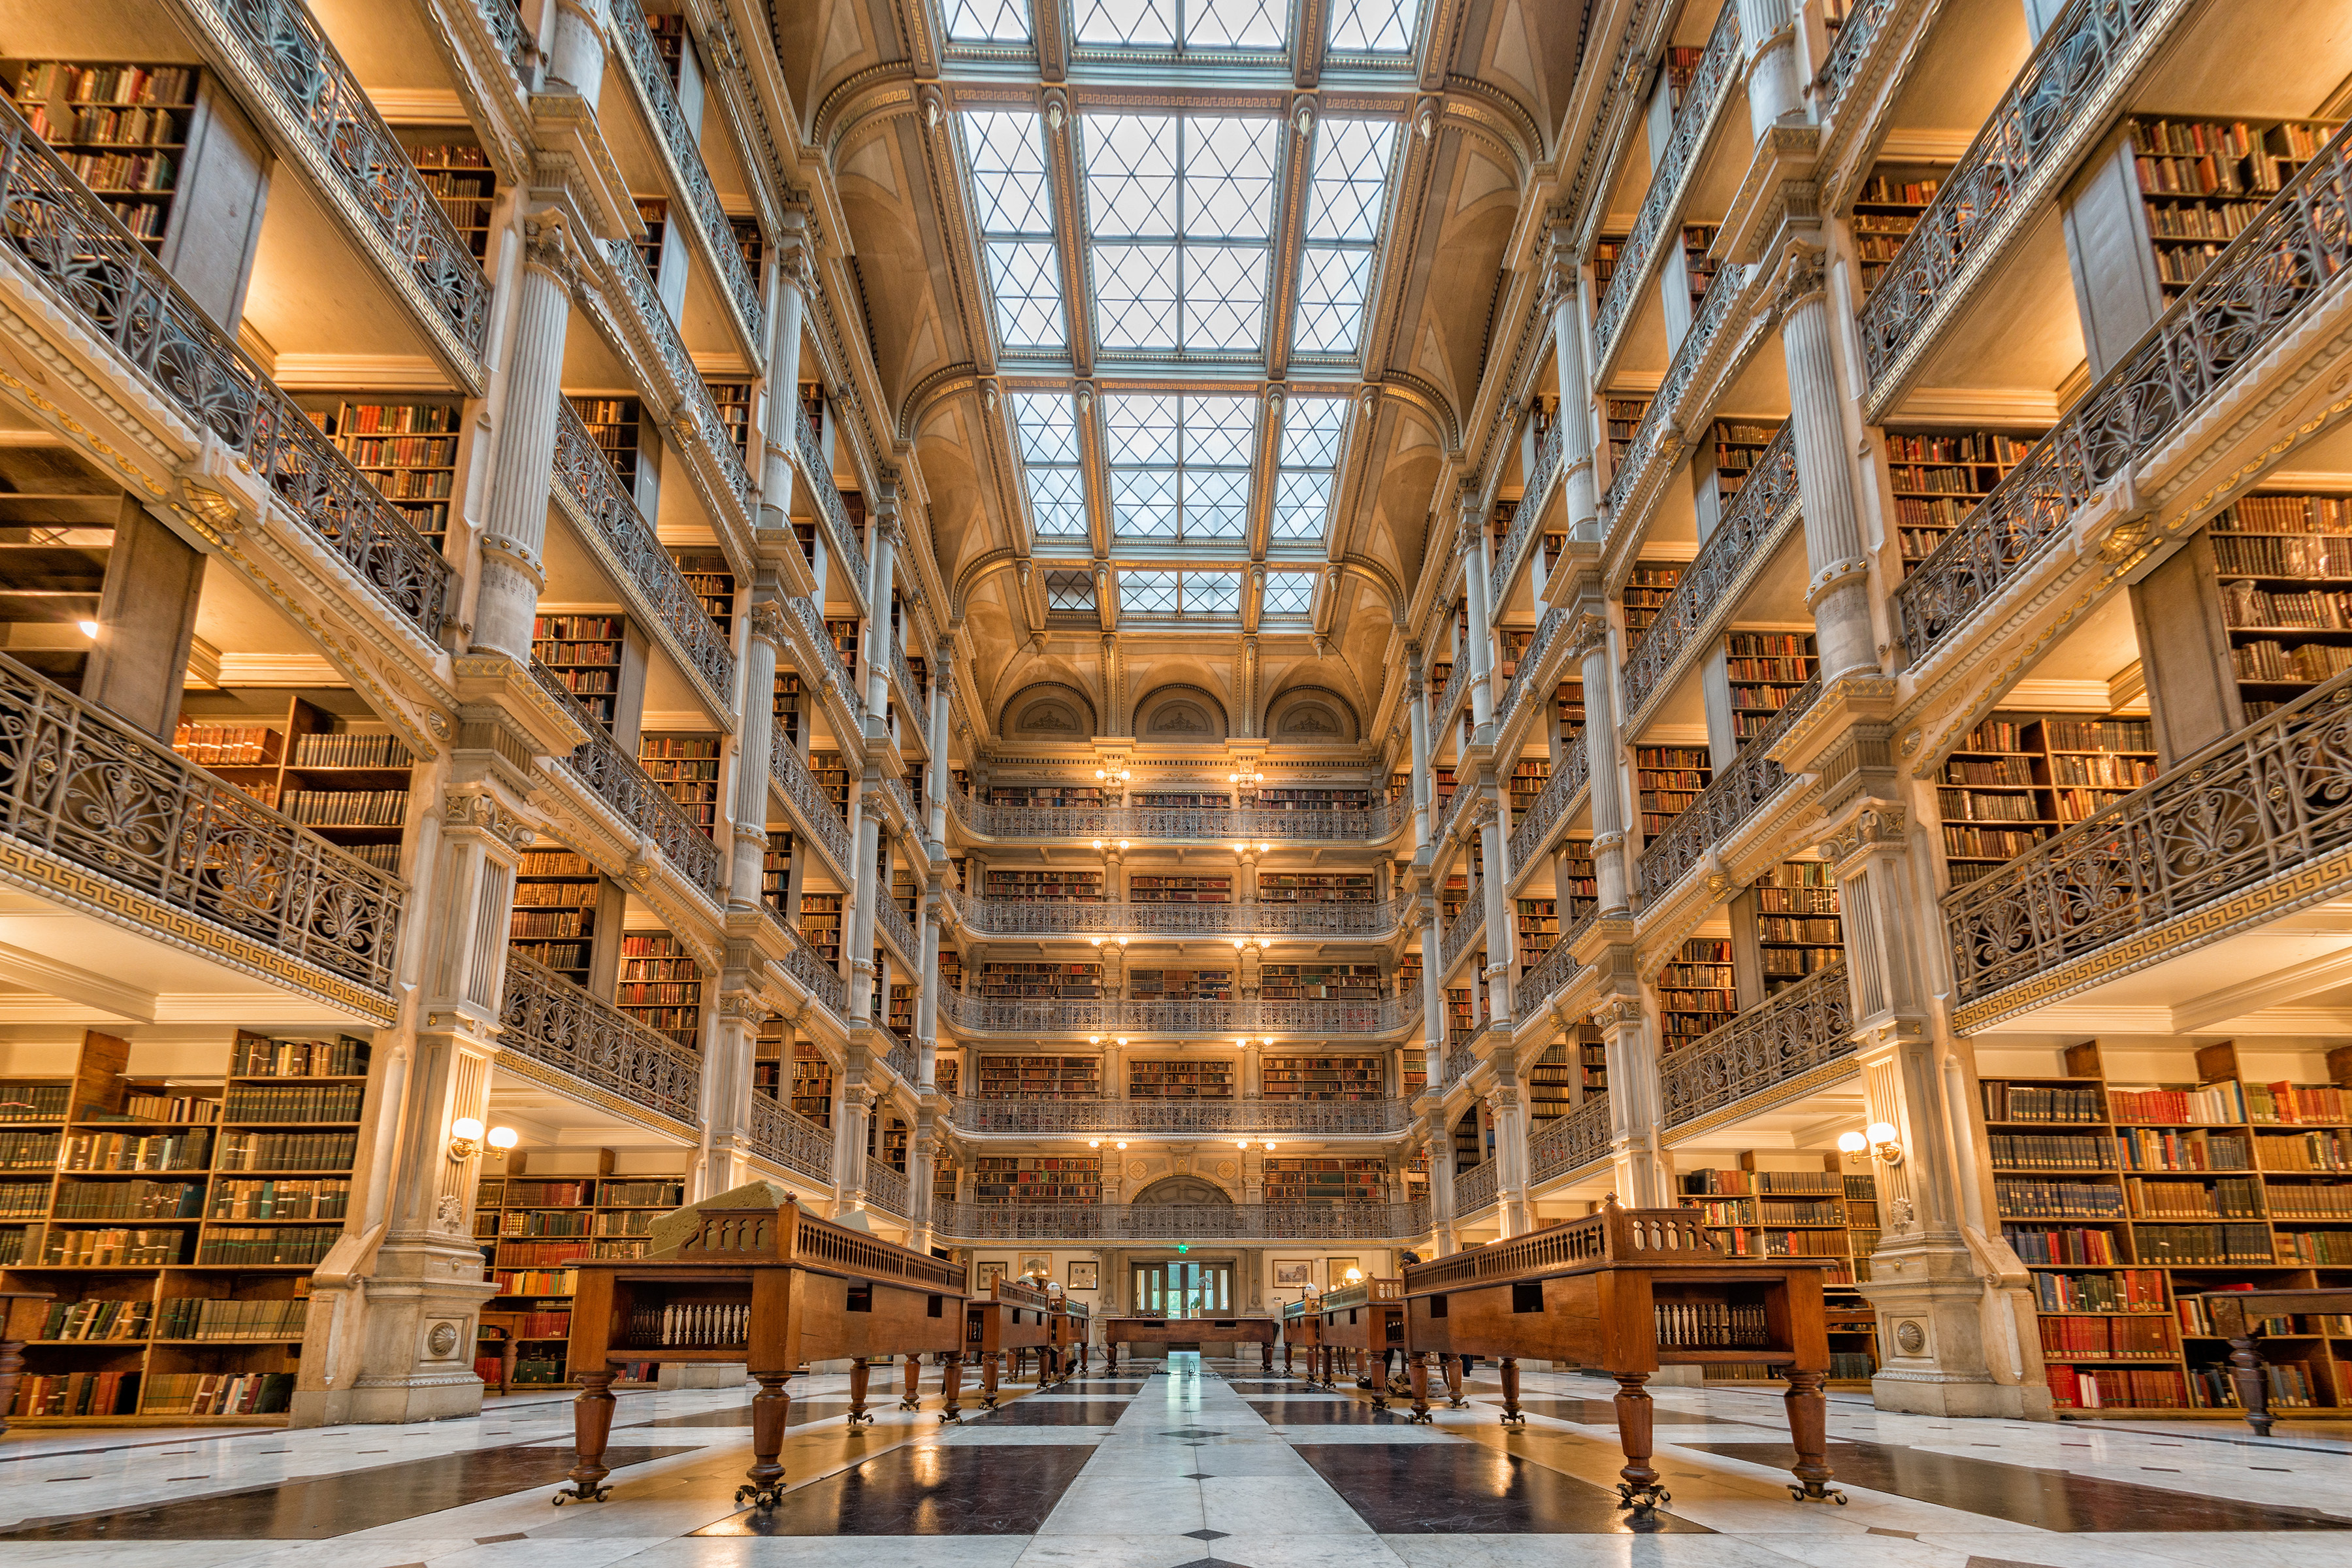 11 Curious Facts about the World's Most Beautiful Libraries - The